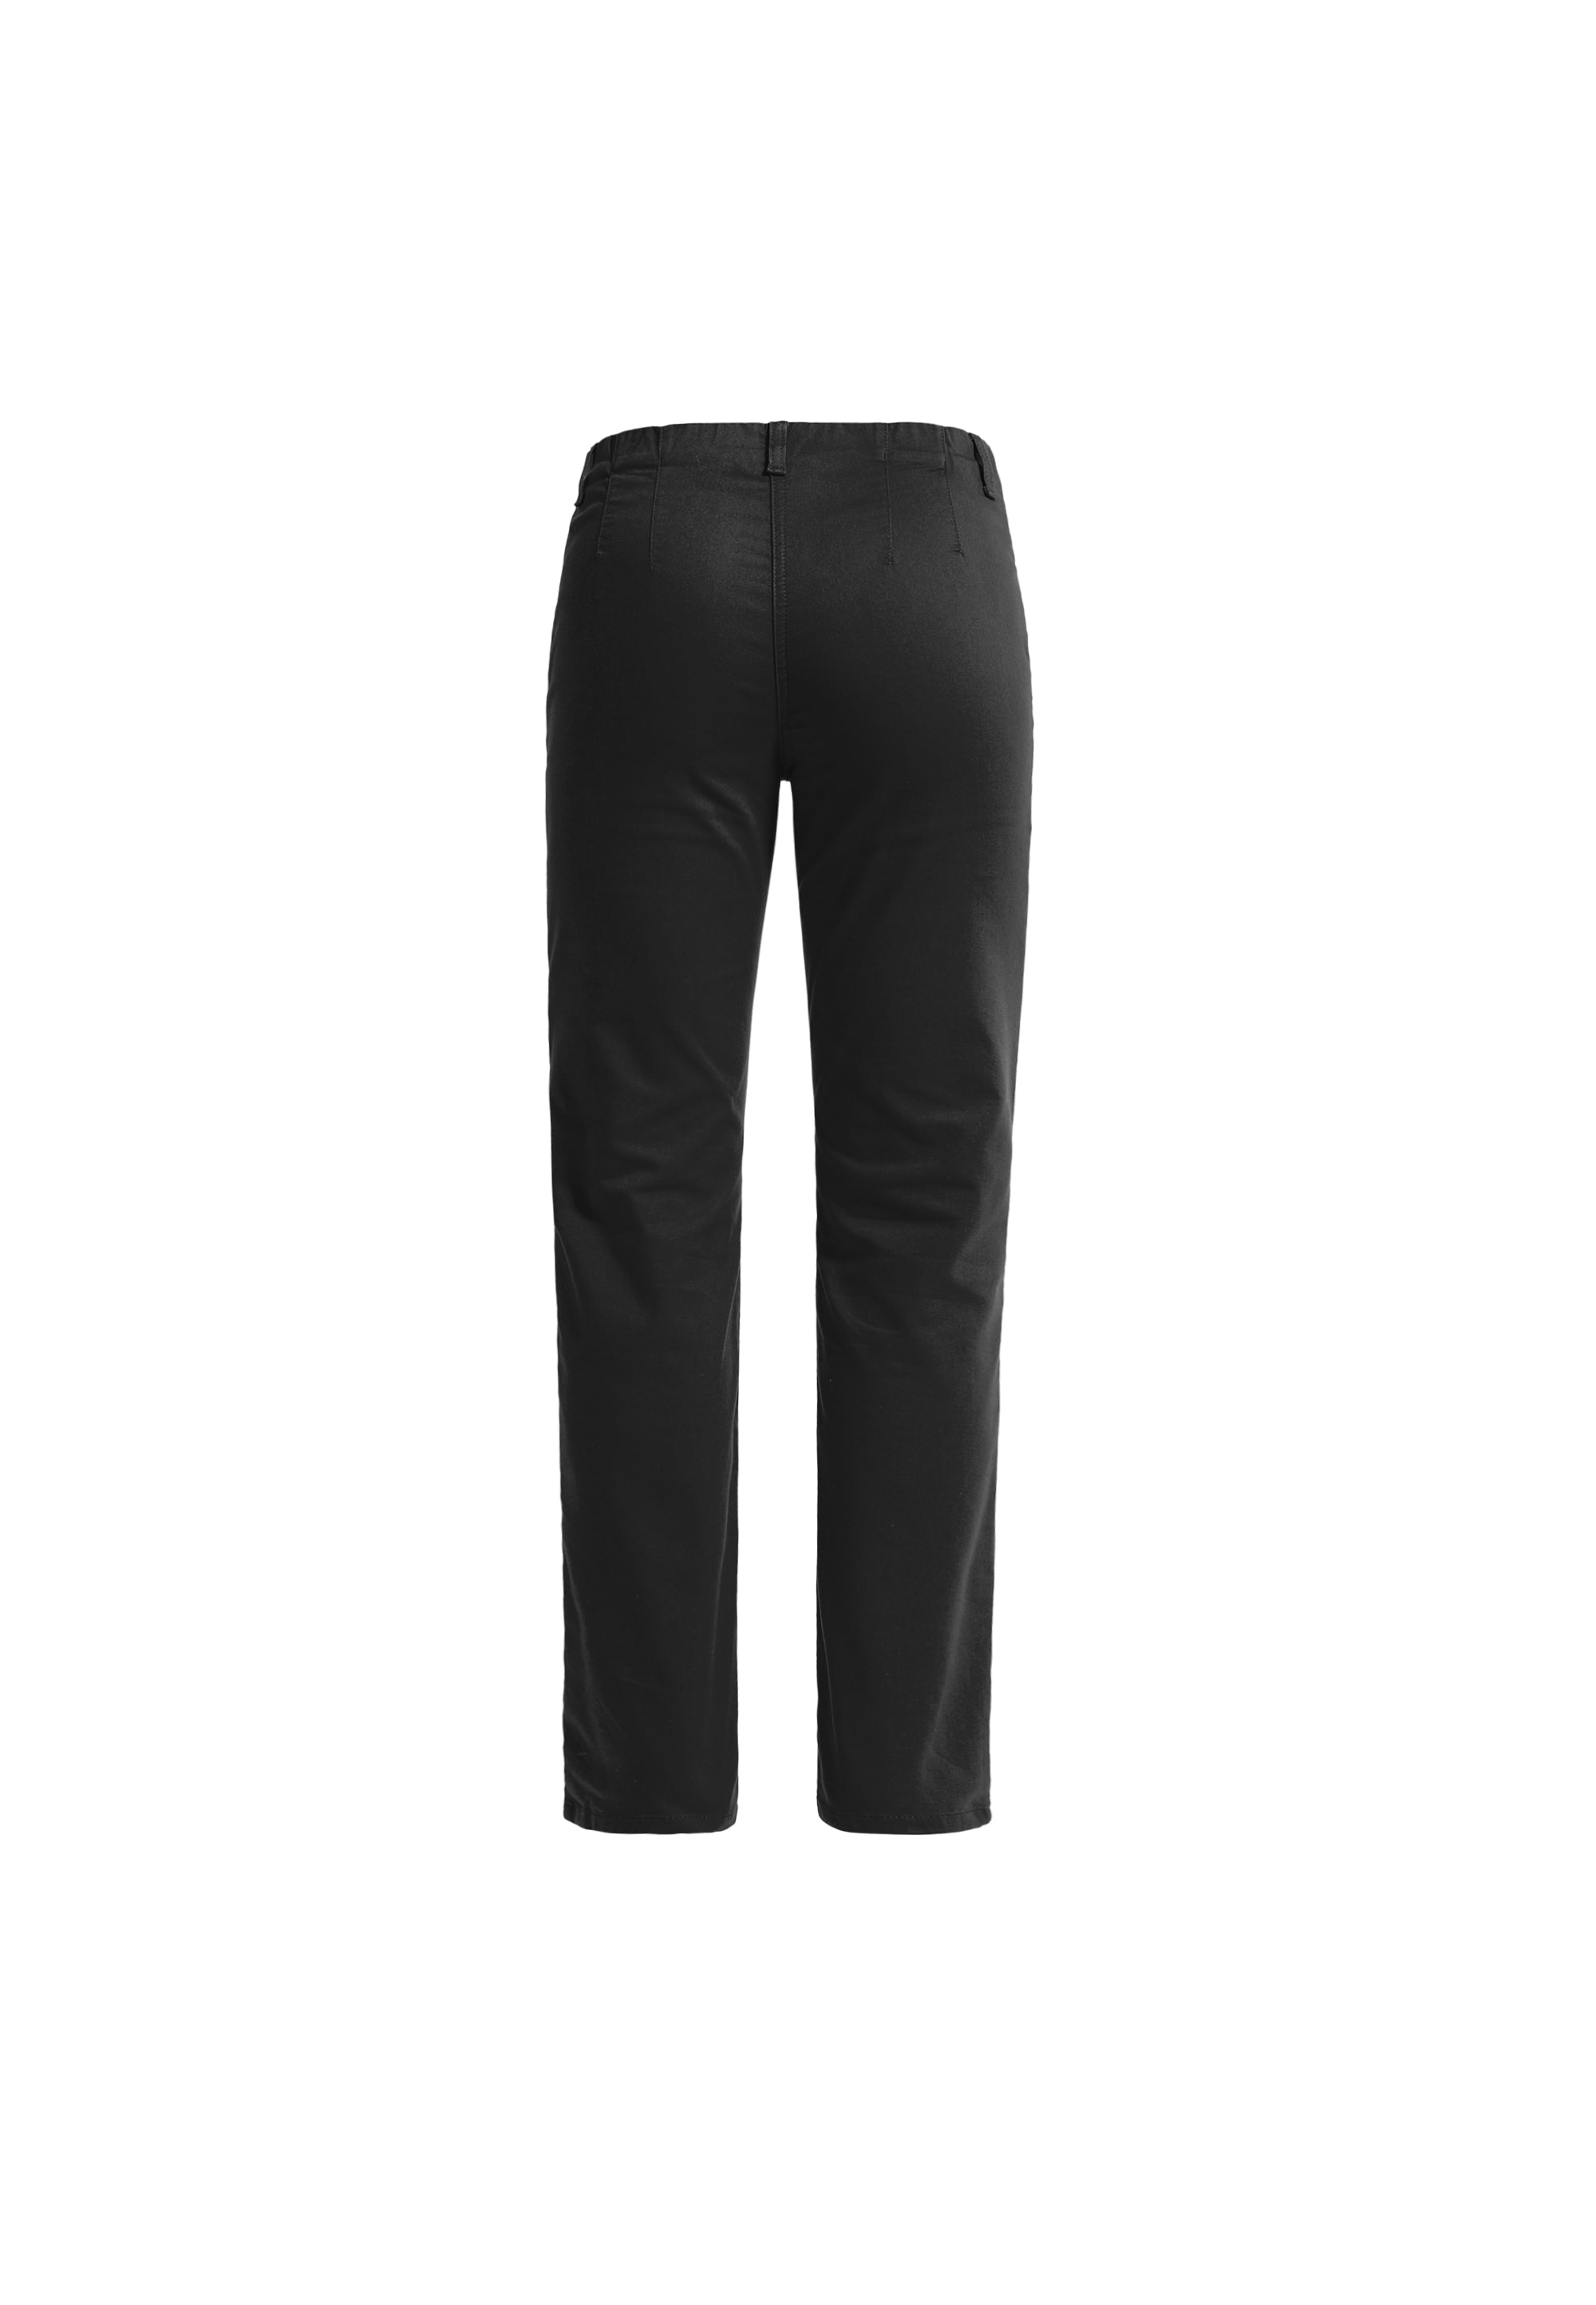 LAURIE  Tracy Straight - Medium Length Trousers STRAIGHT 99000 Black